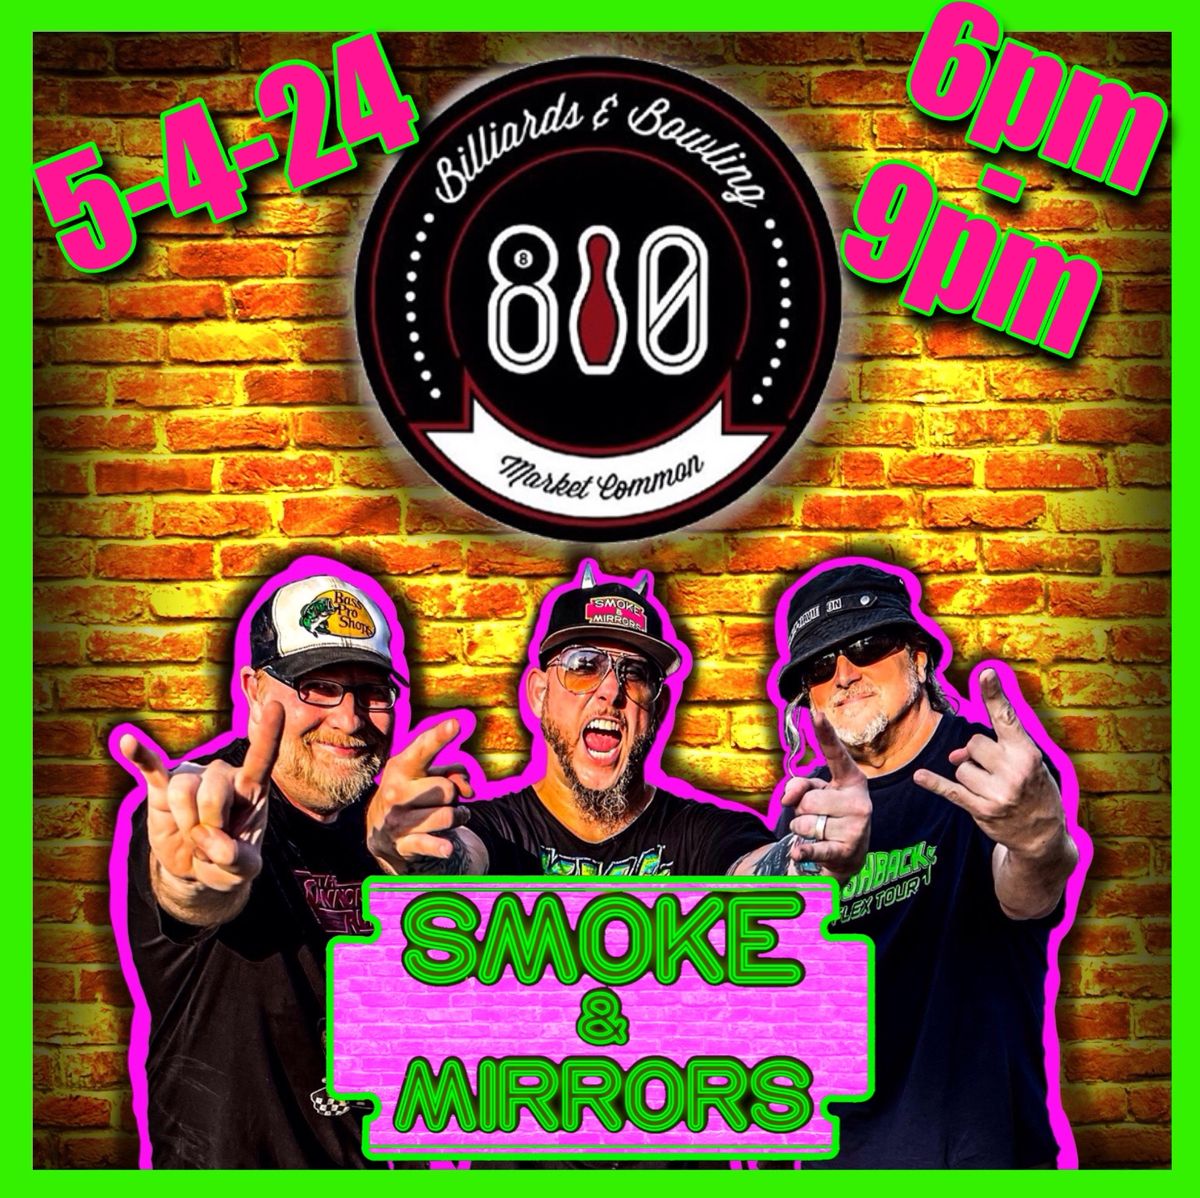 Smoke and Mirror rocking 810 Billiards and Bowling Market Common